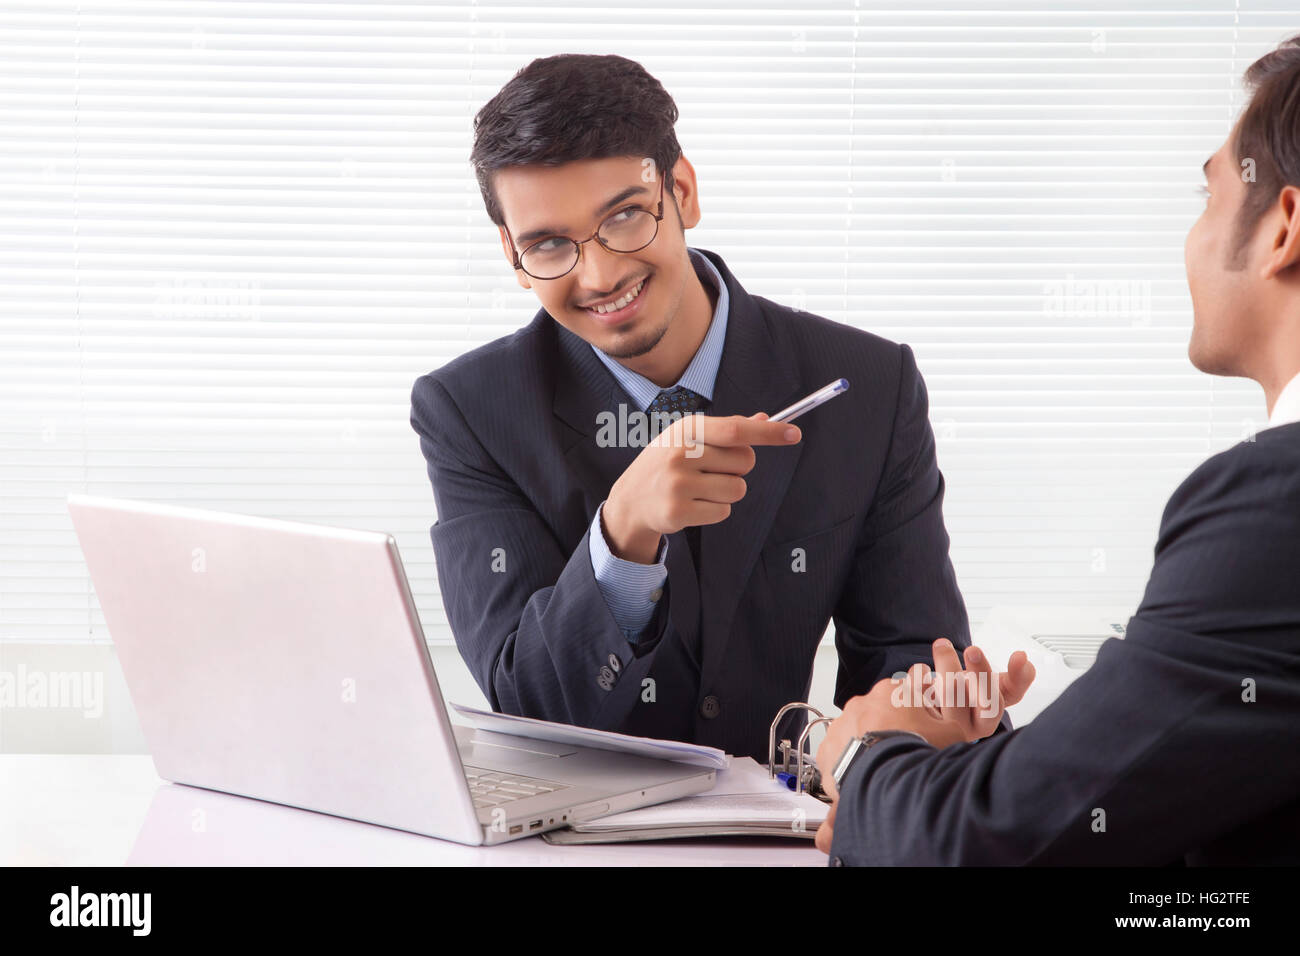 Two young professional men in happy mood while discussing work at office Stock Photo